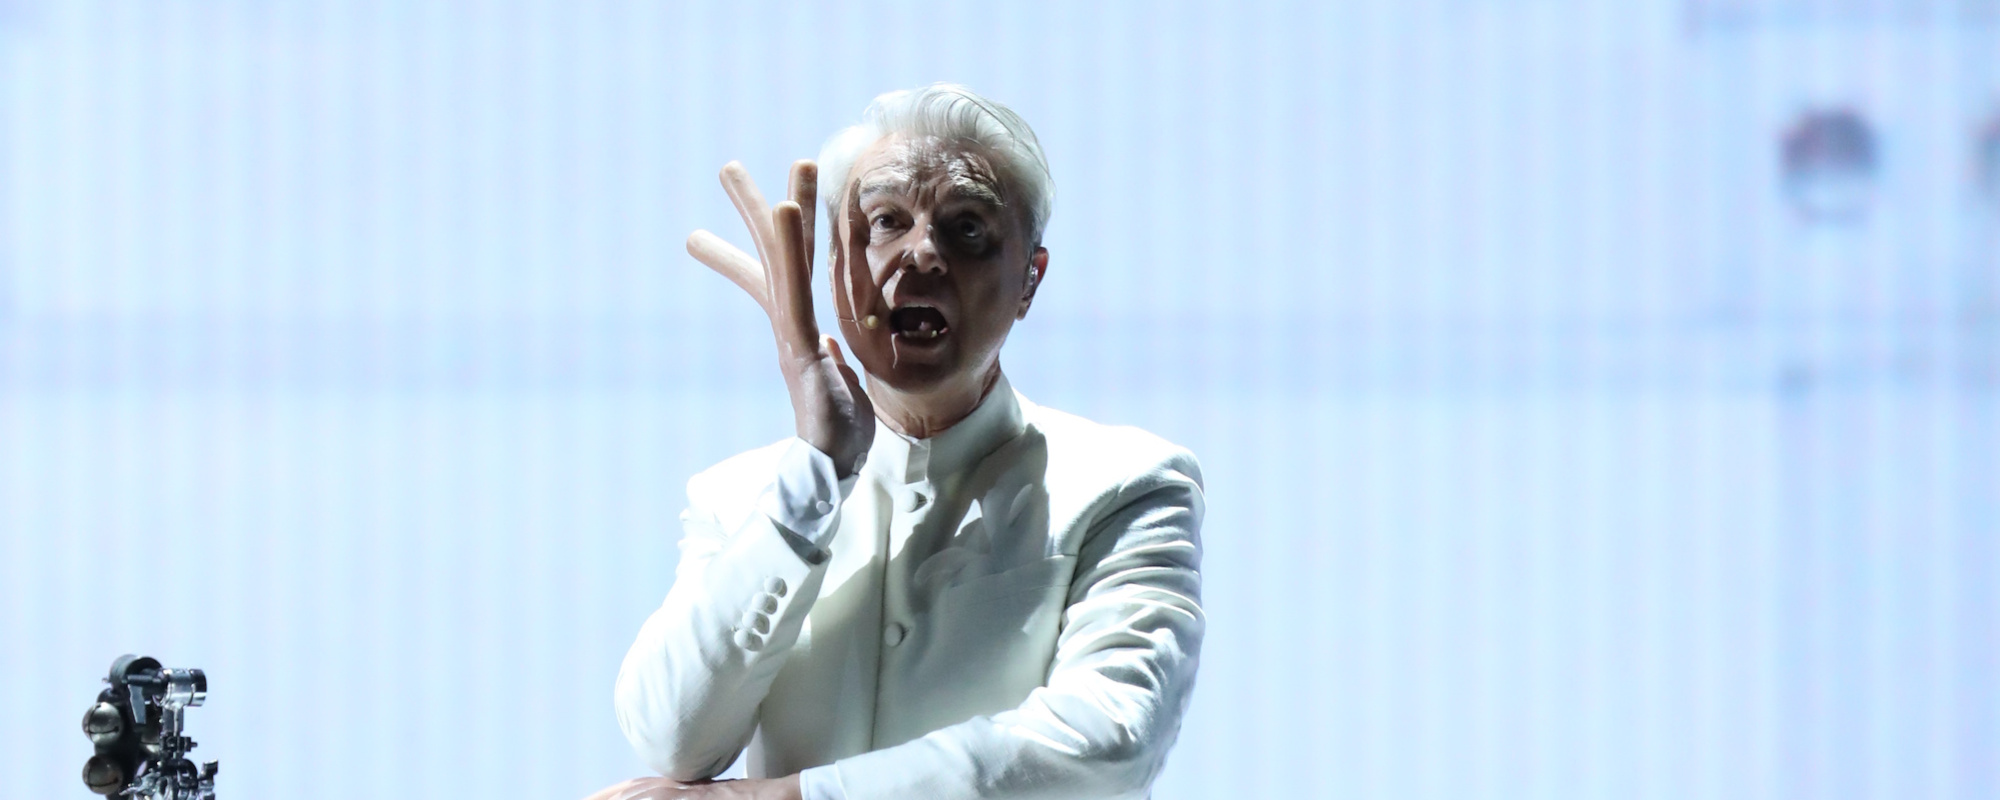 Wearing Hot Dog Fingers, David Byrne Sings “This Is a Life” from ‘Everything Everywhere All At Once’ at Oscars